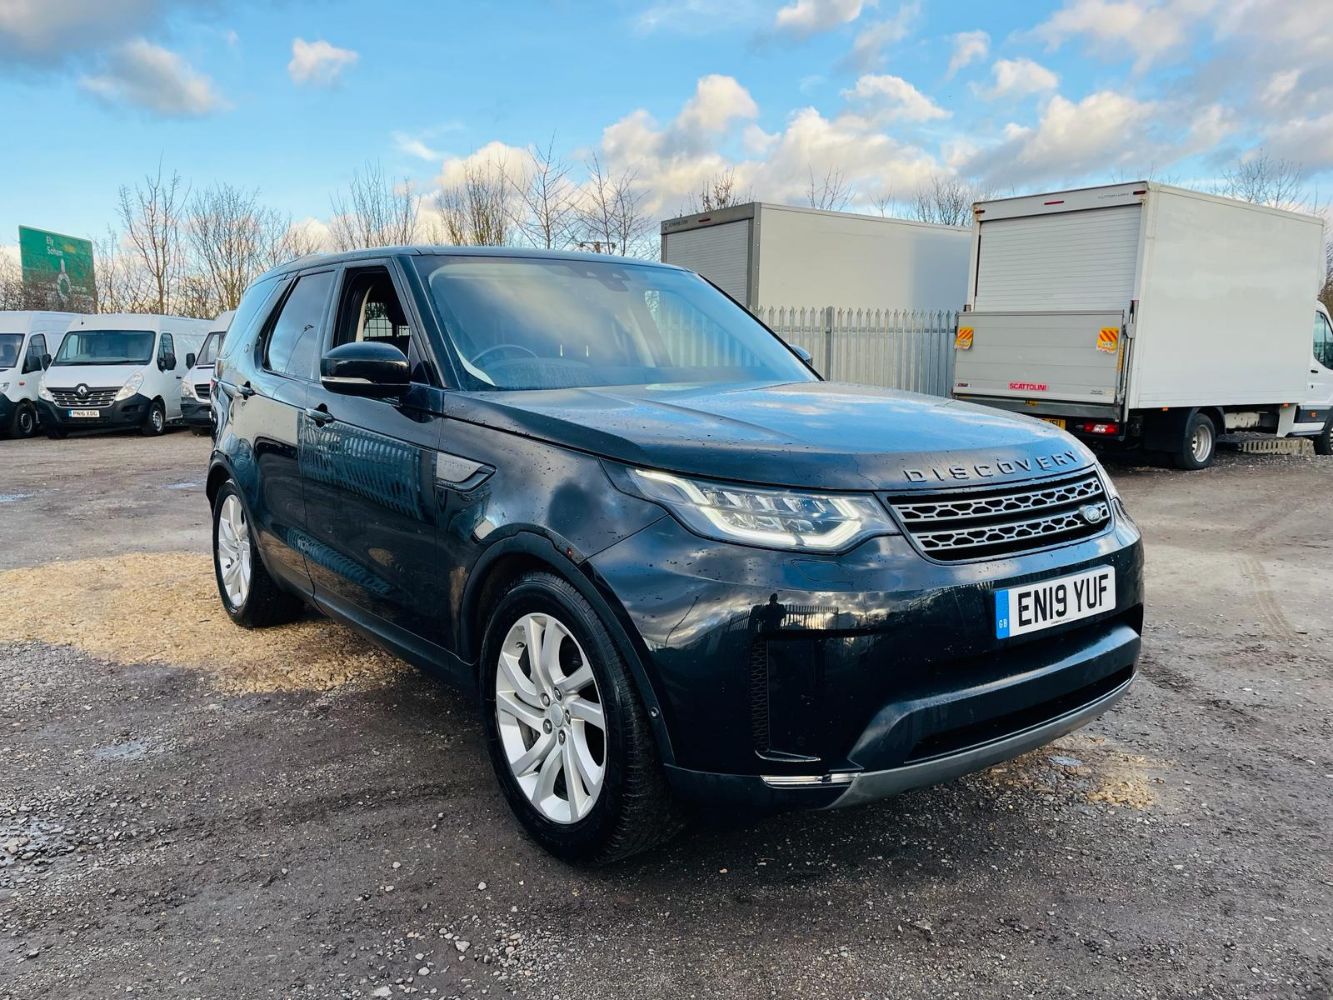 ** Commercial Vehicle & Car Event ** Land Rover Discovery 5 SE 2019 - Nissan Cabstar NT400 2016 Alloy dropside - Over 30+ Lots 